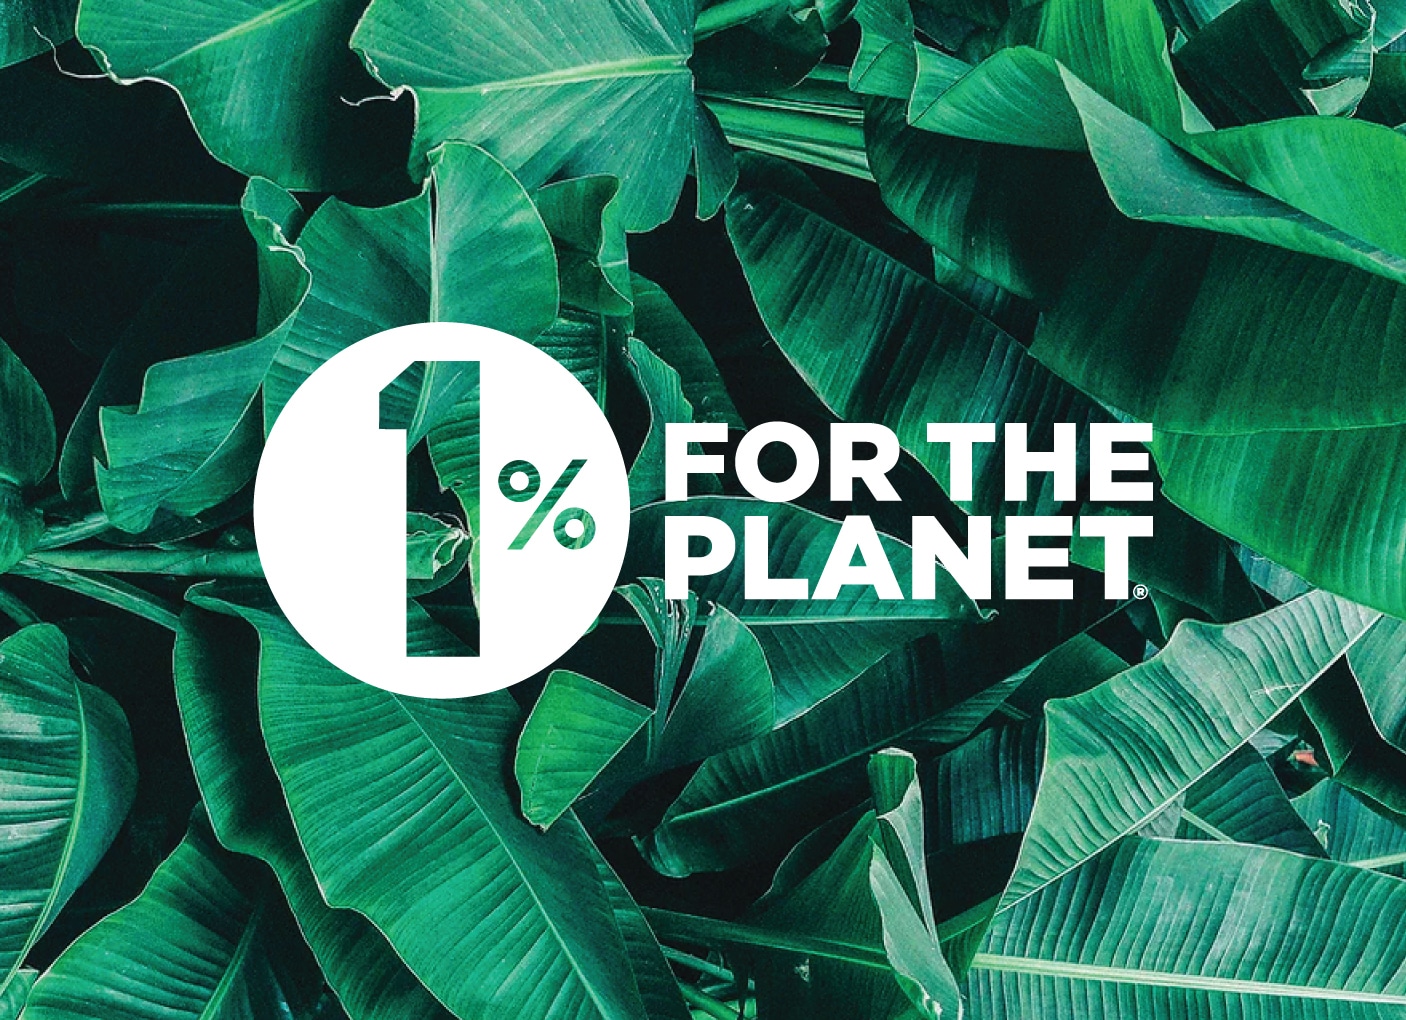 the number one for the planet is surrounded by green leaves